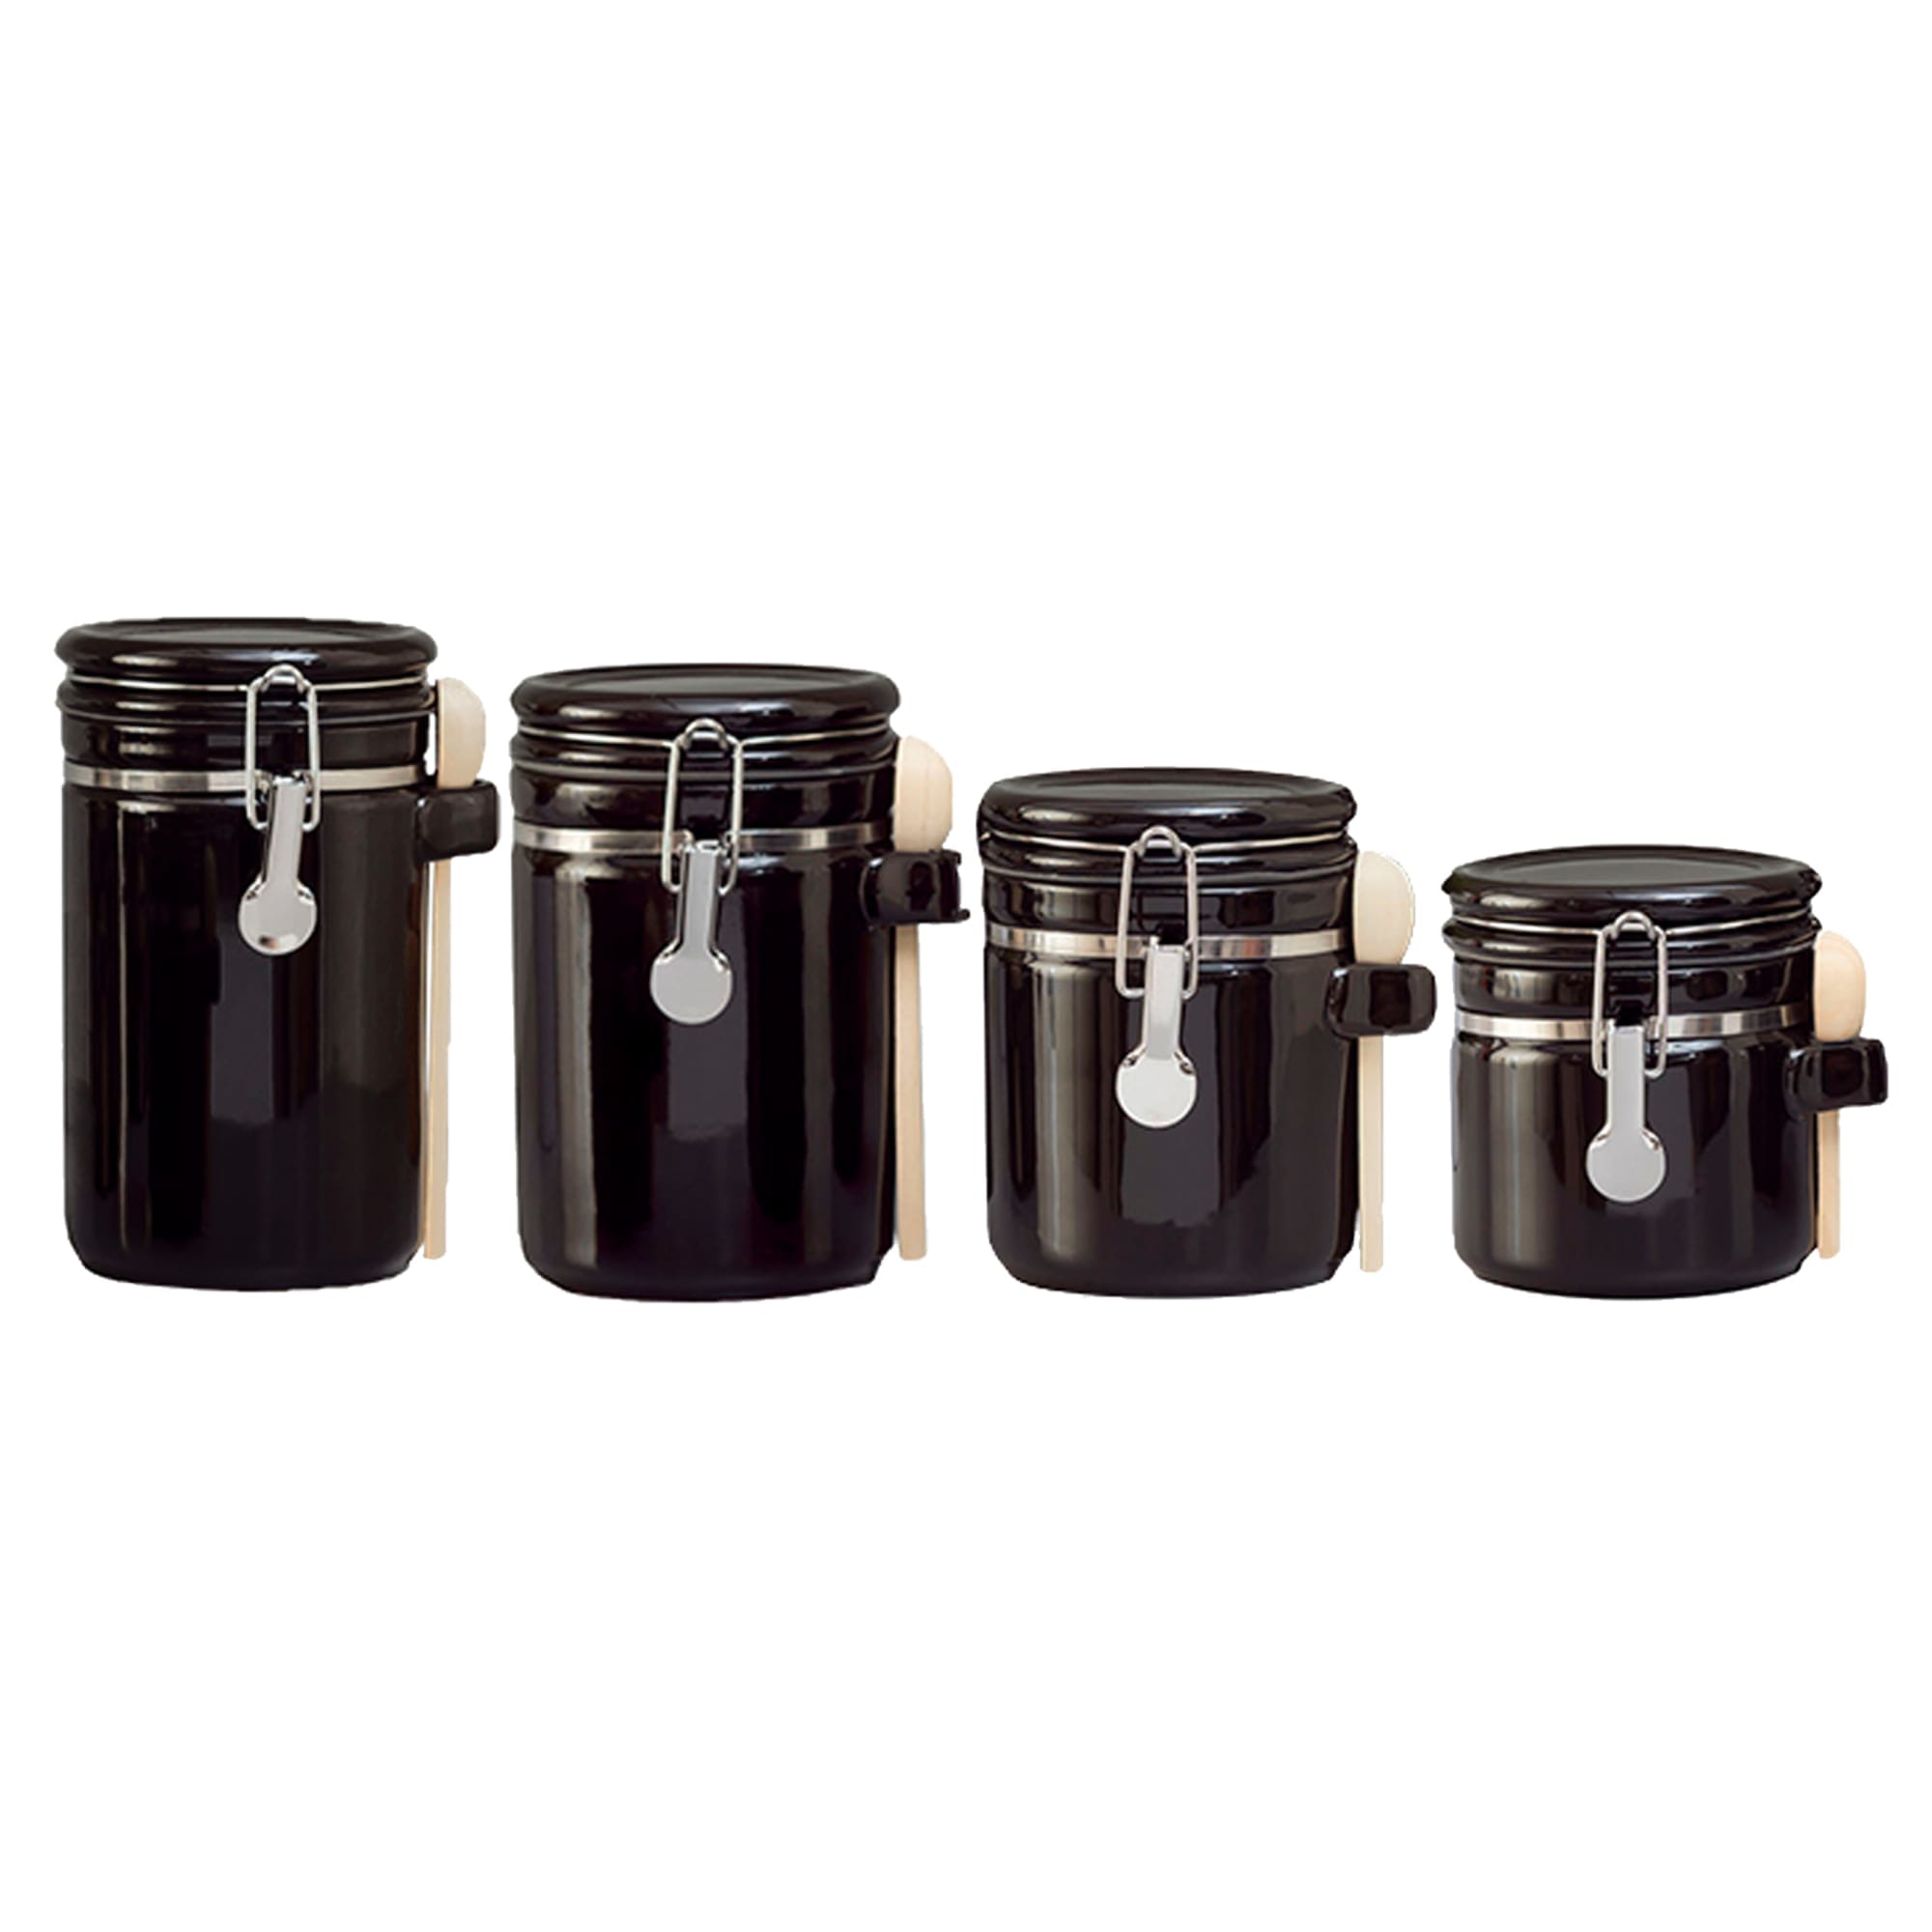 Home Basics 4 Piece Ceramic Canister Set with Wooden Spoons, Black $20.00 EACH, CASE PACK OF 2